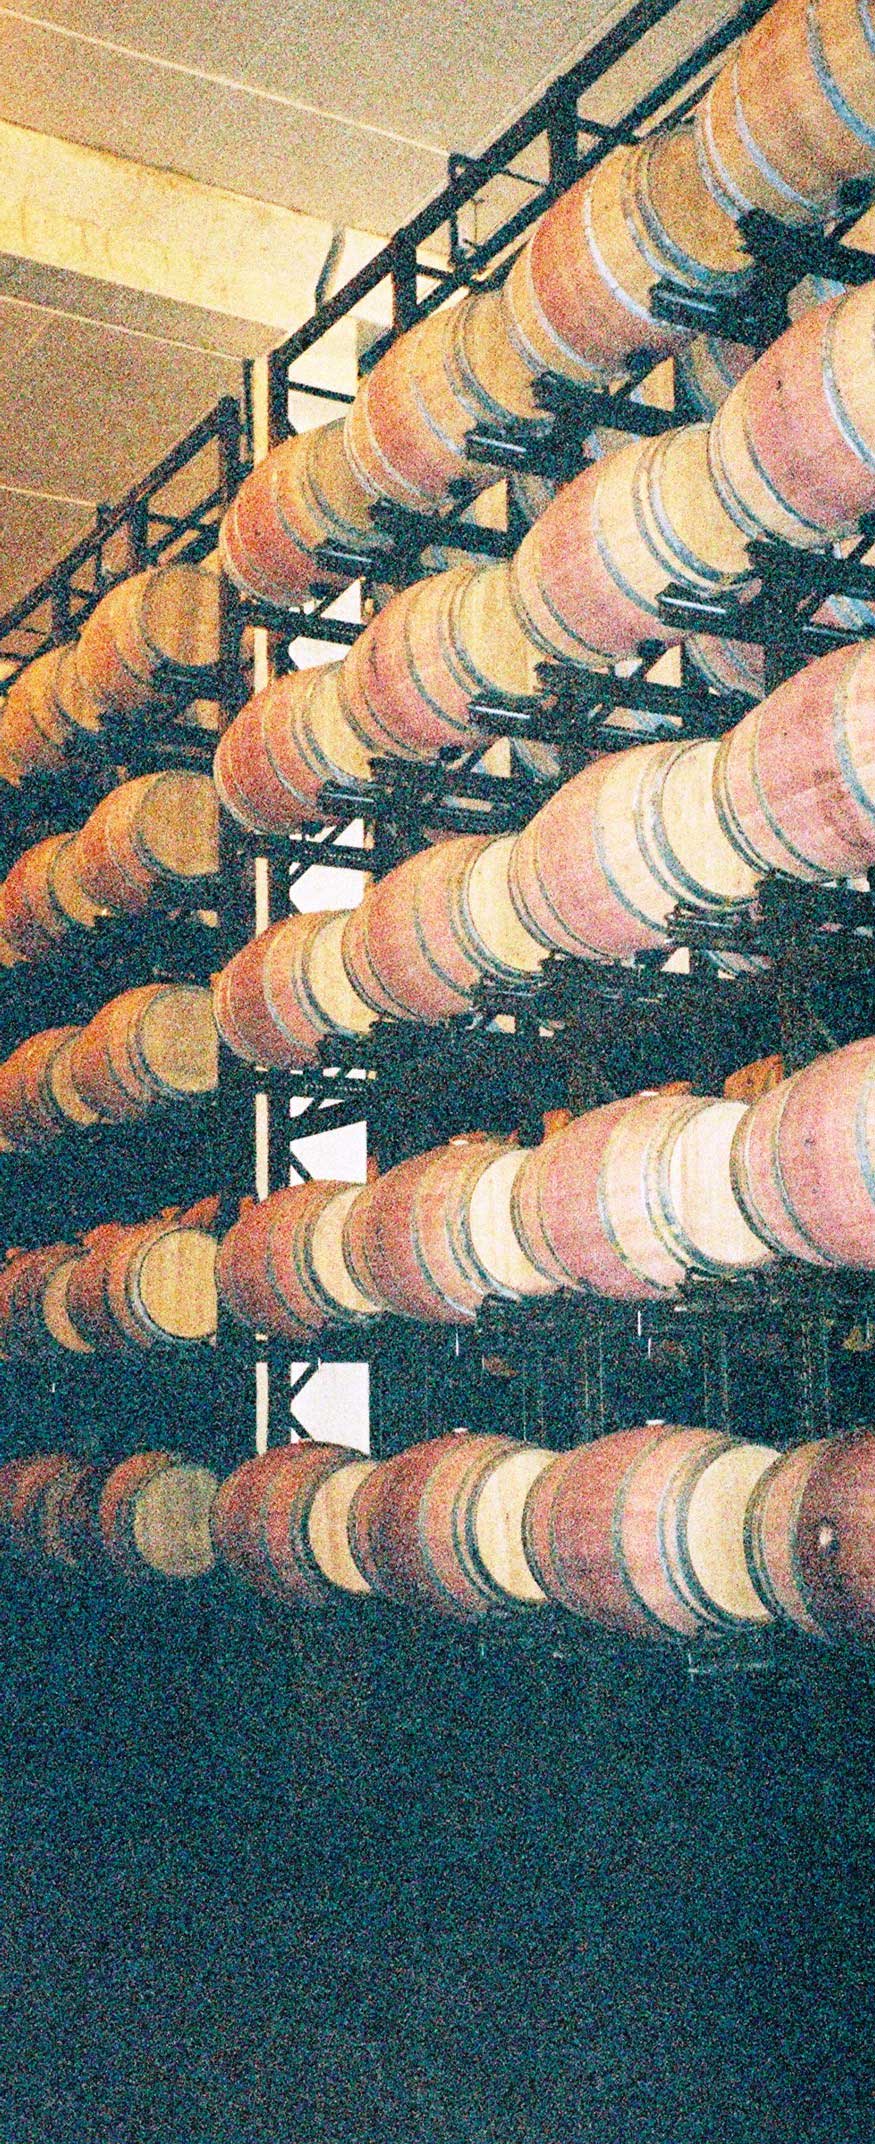 Specially modified barrels with bungs top and bottom, in special frames stacking them five high  (photo copyright Andrew Stevenson)